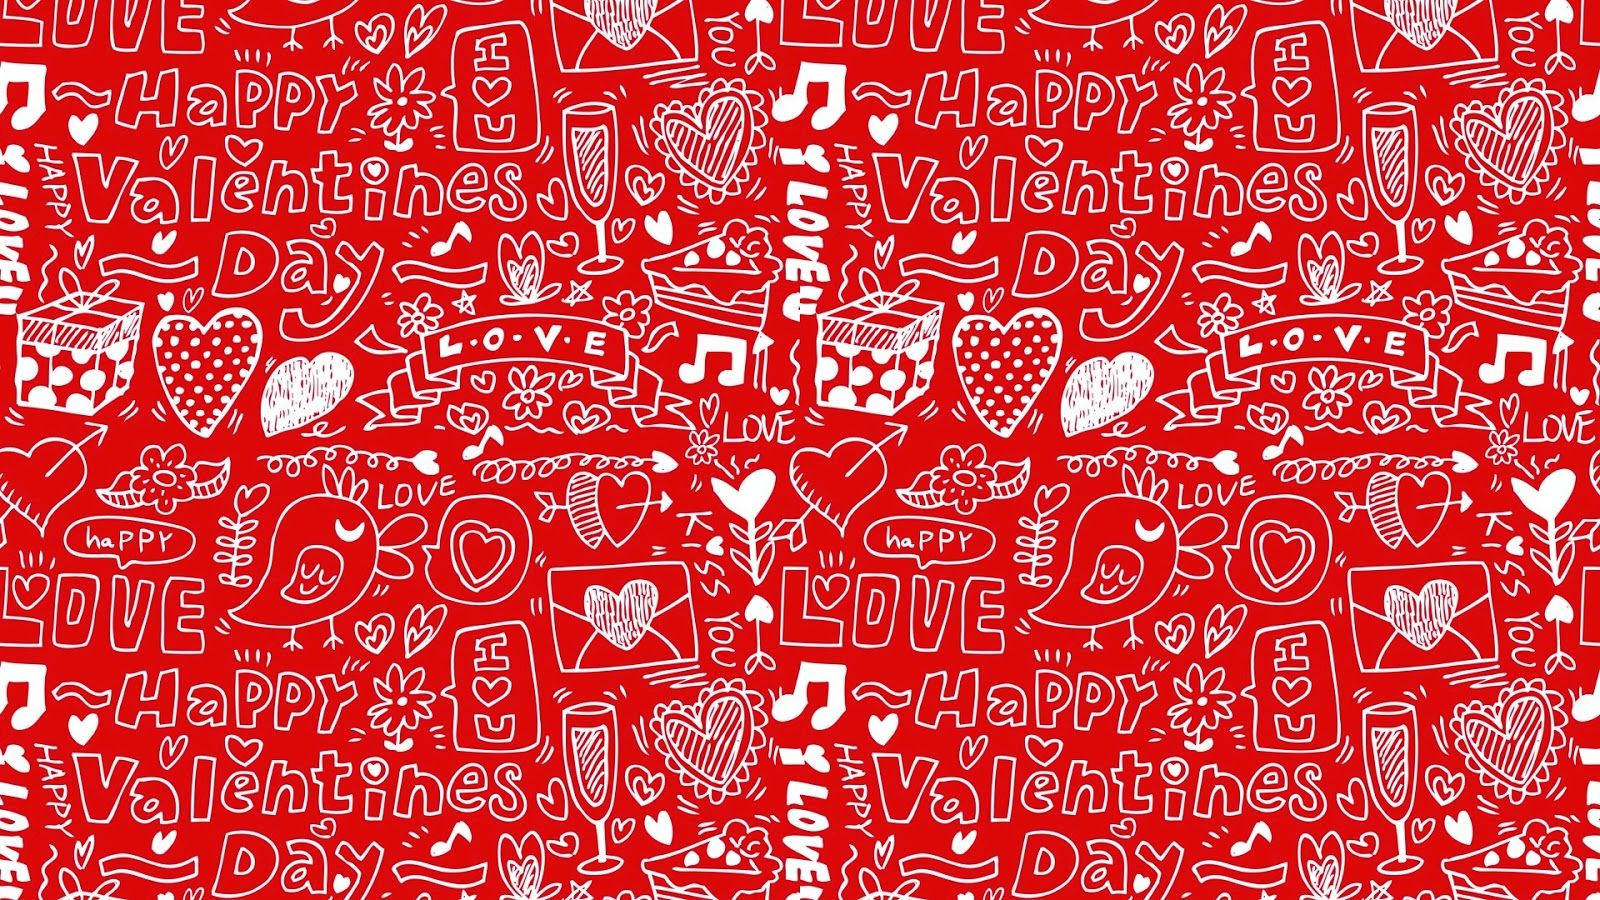 Red Aesthetic Valentine's Imagery For Computer Wallpaper